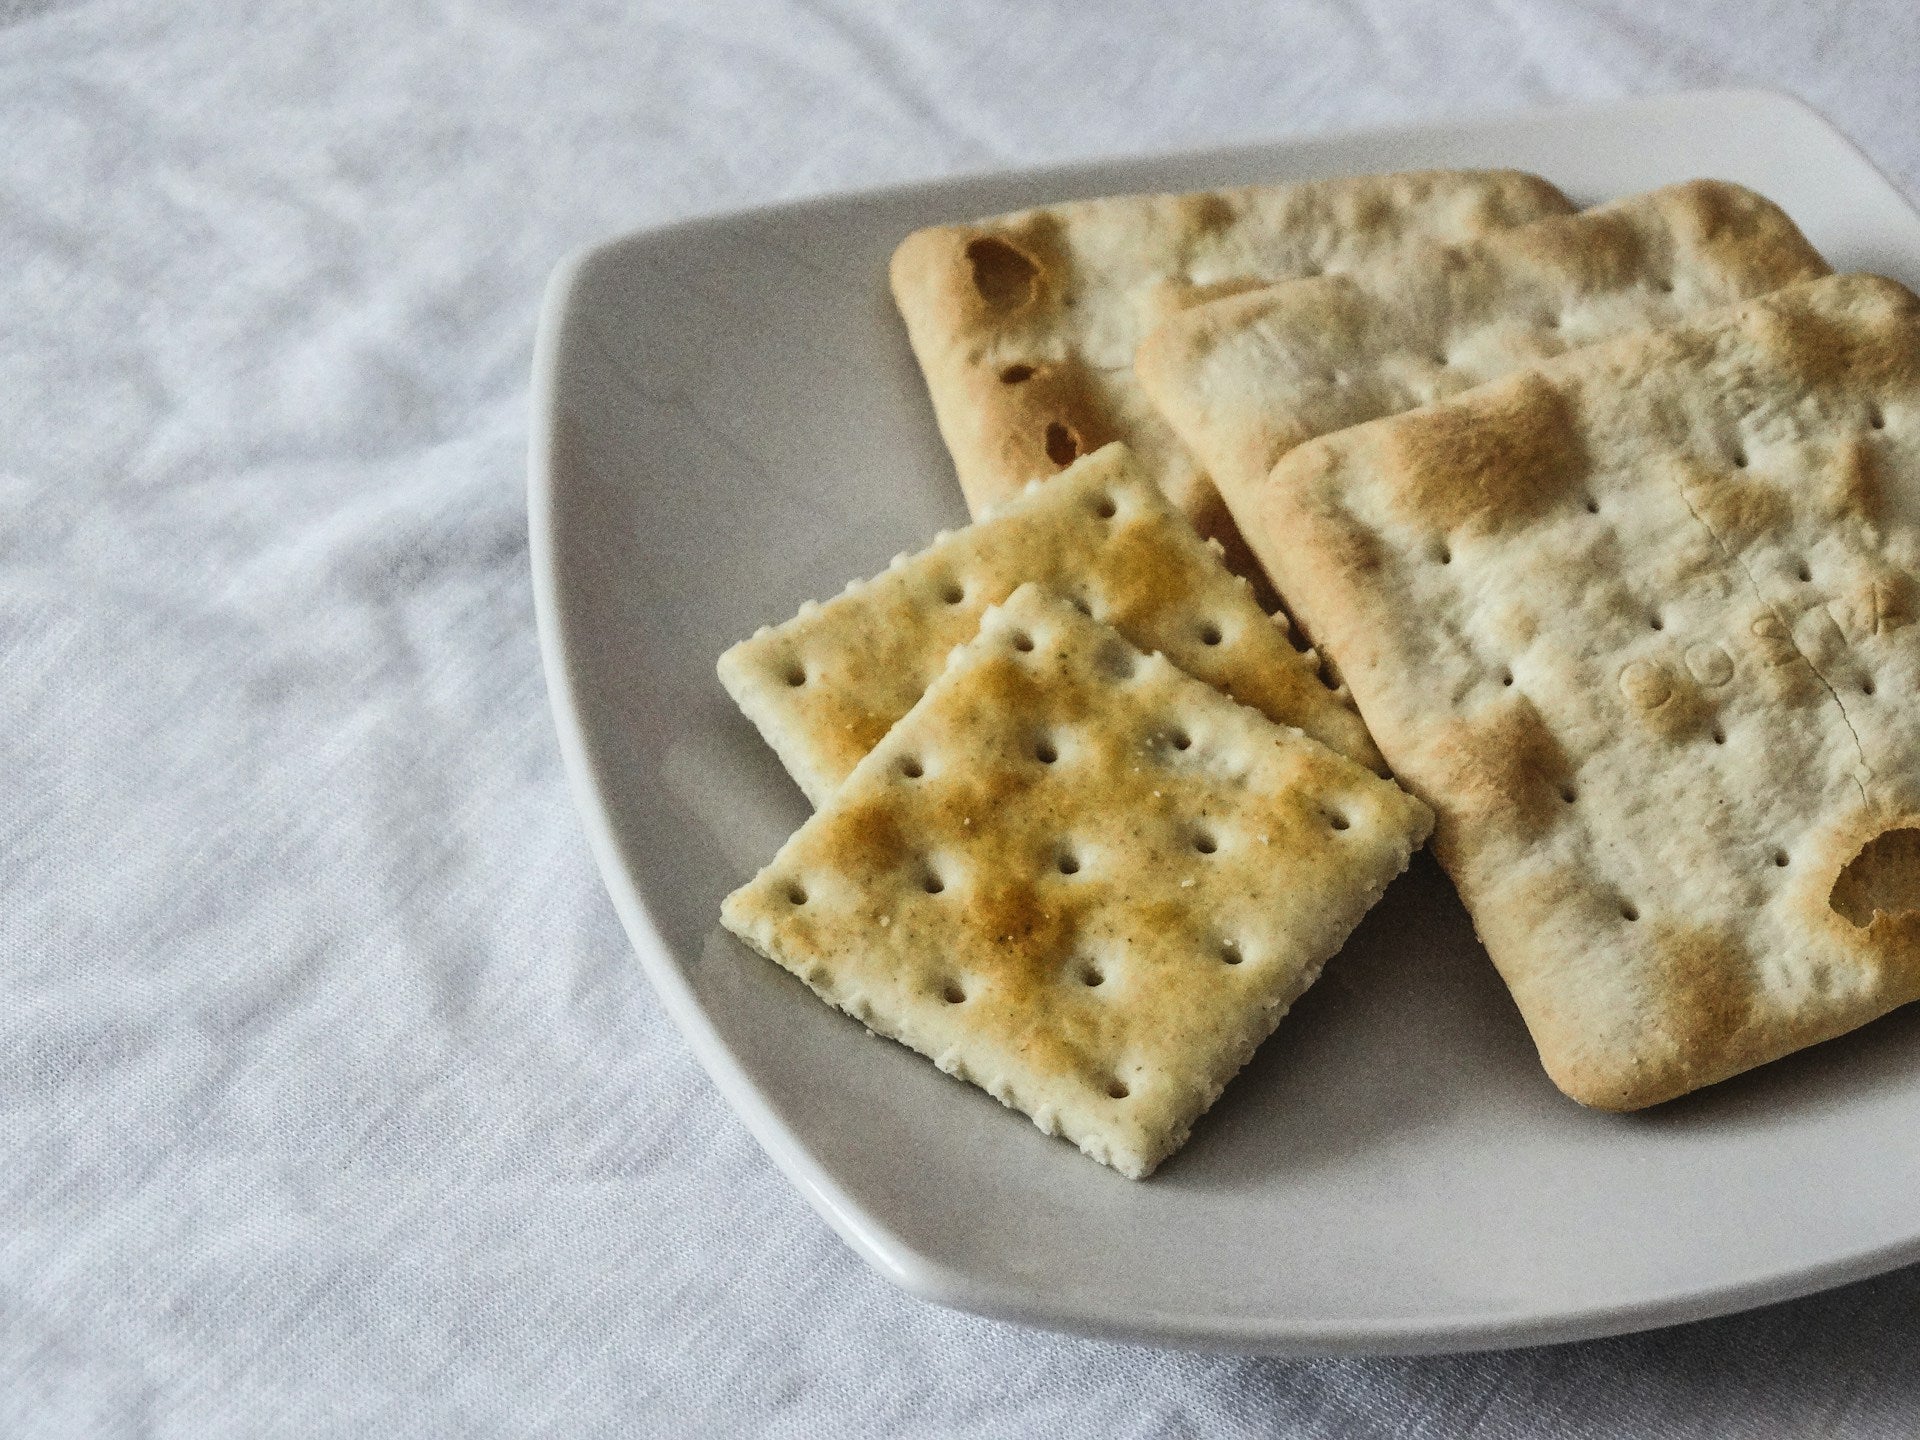 Top 10 Healthy Crackers for Snacking in 2023